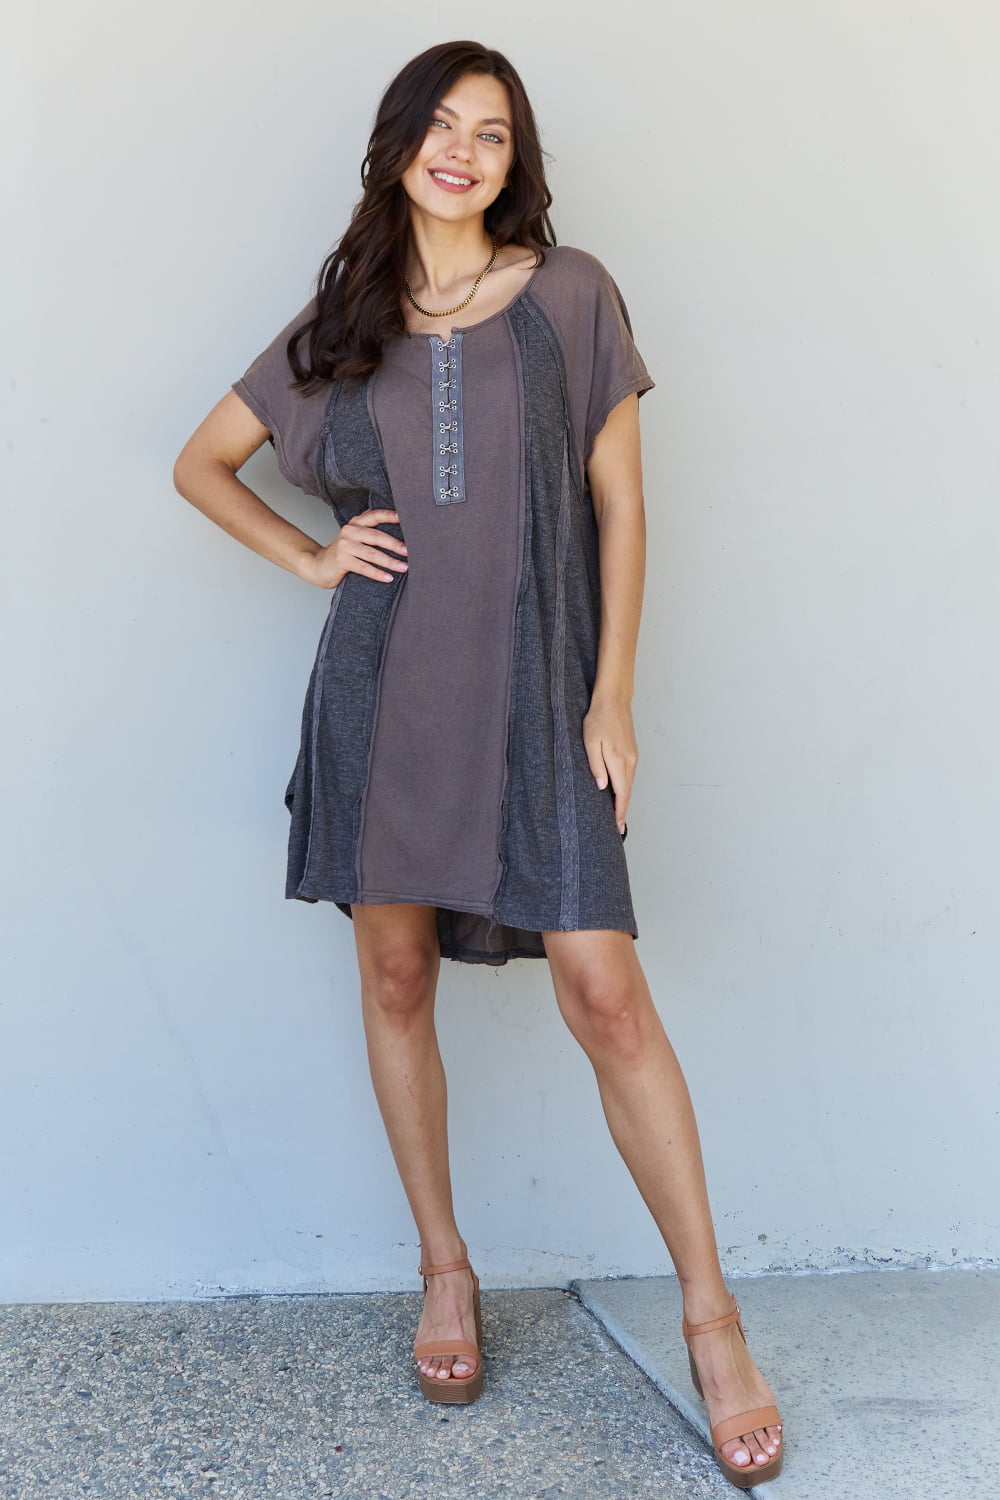 POL All Day Comfort Front Hook Contrast T-Shirt Dress in Mocha